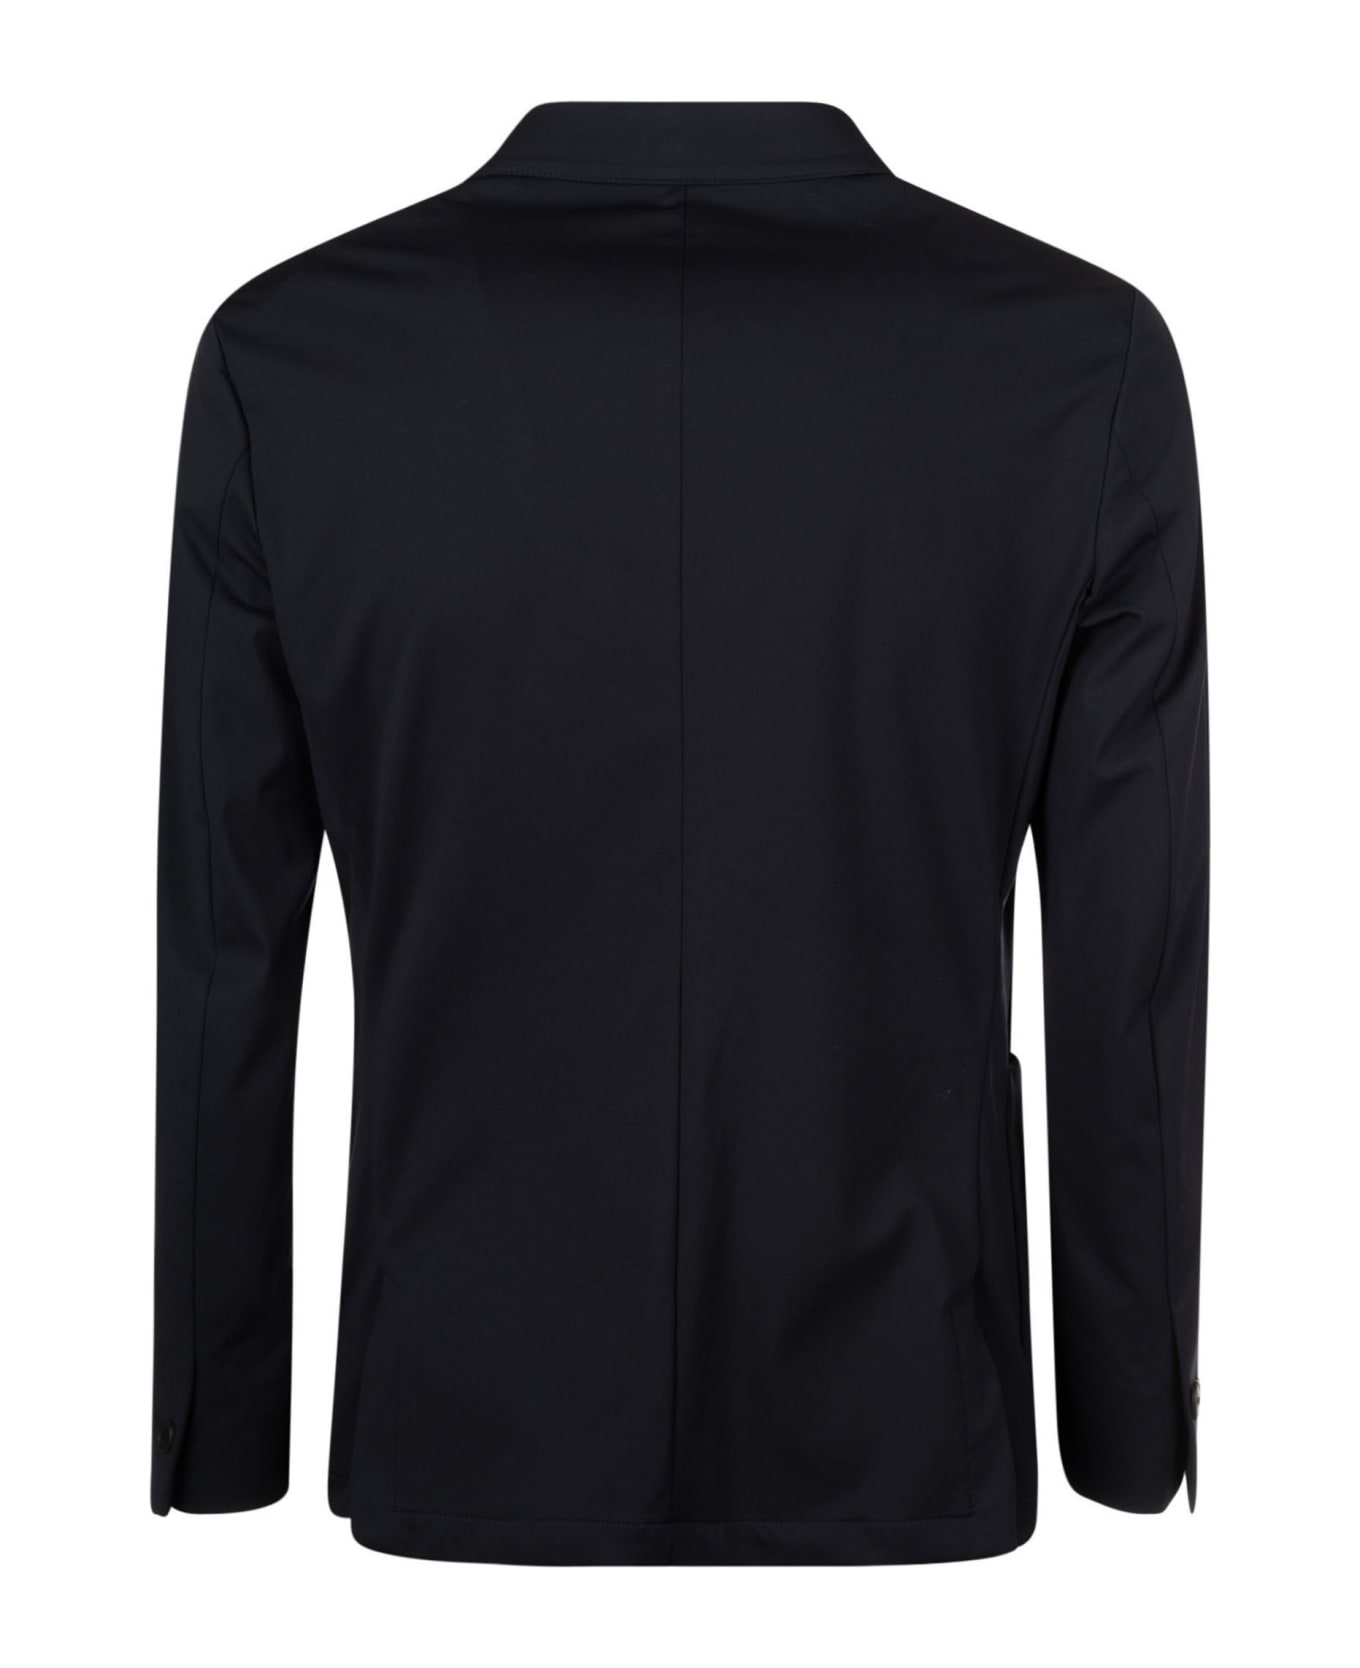 Tombolini Two-button Mid-length Blazer